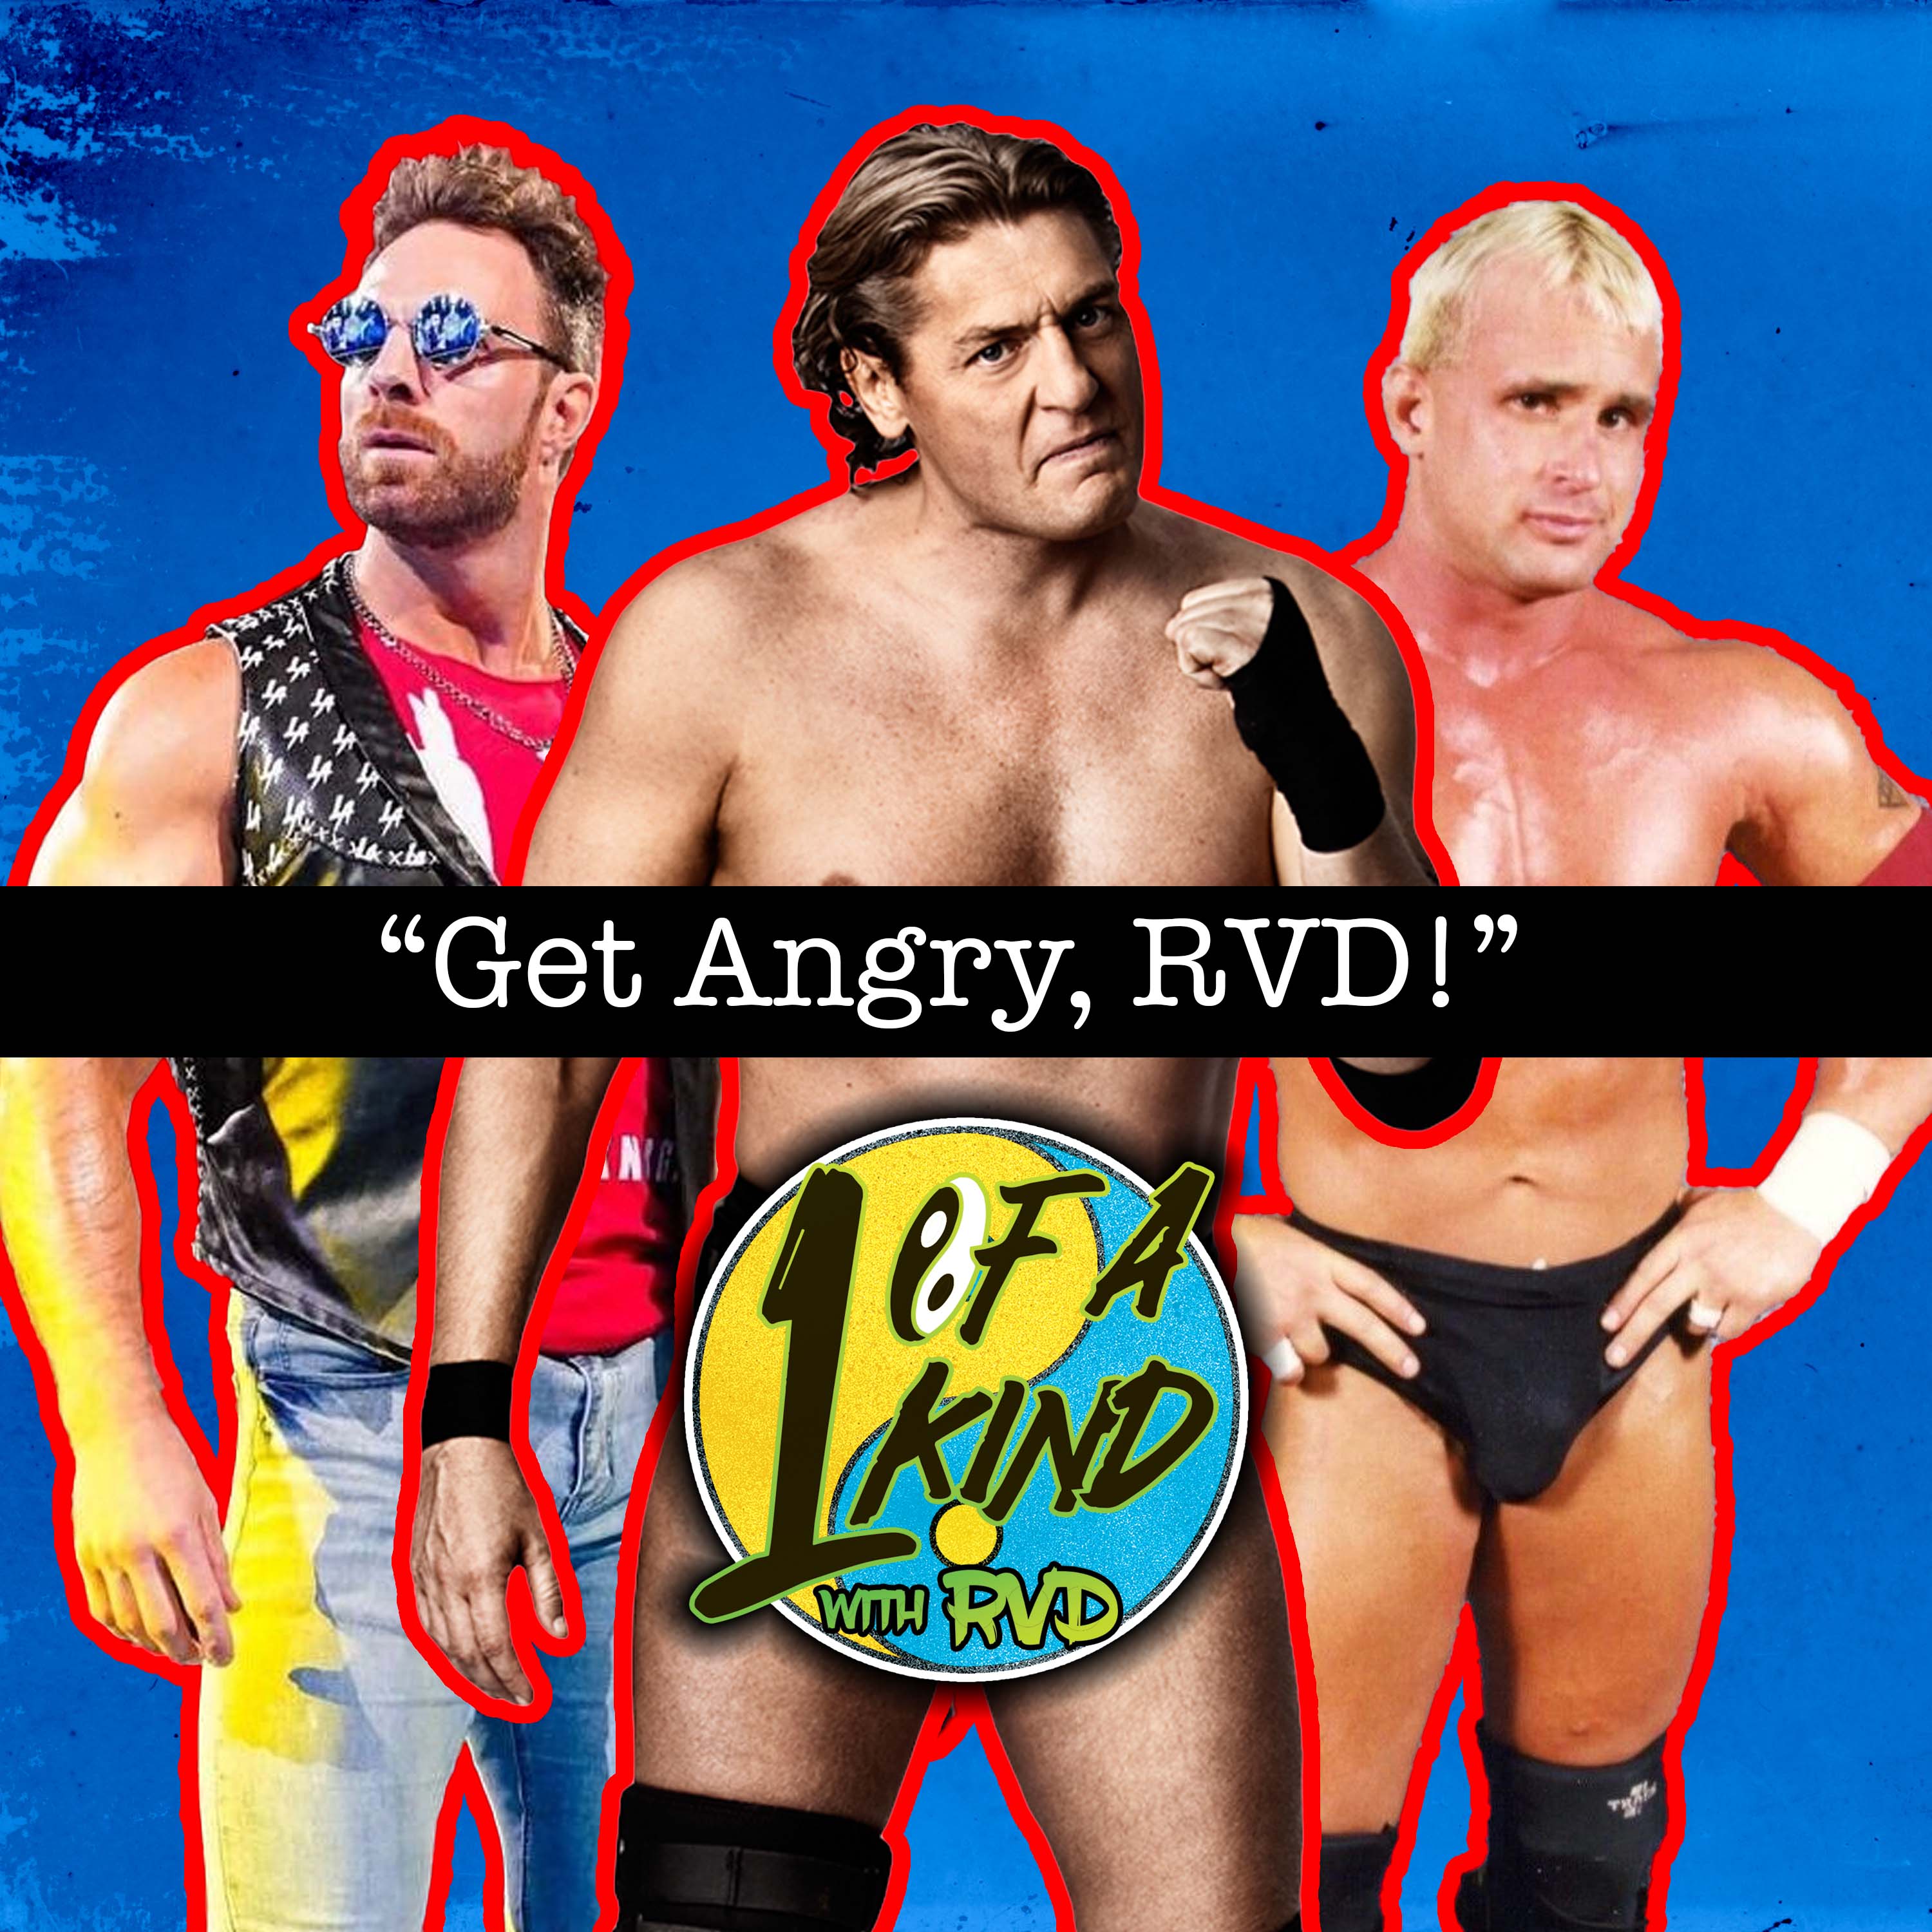 Episode 45: ”Get Angry, RVD!”